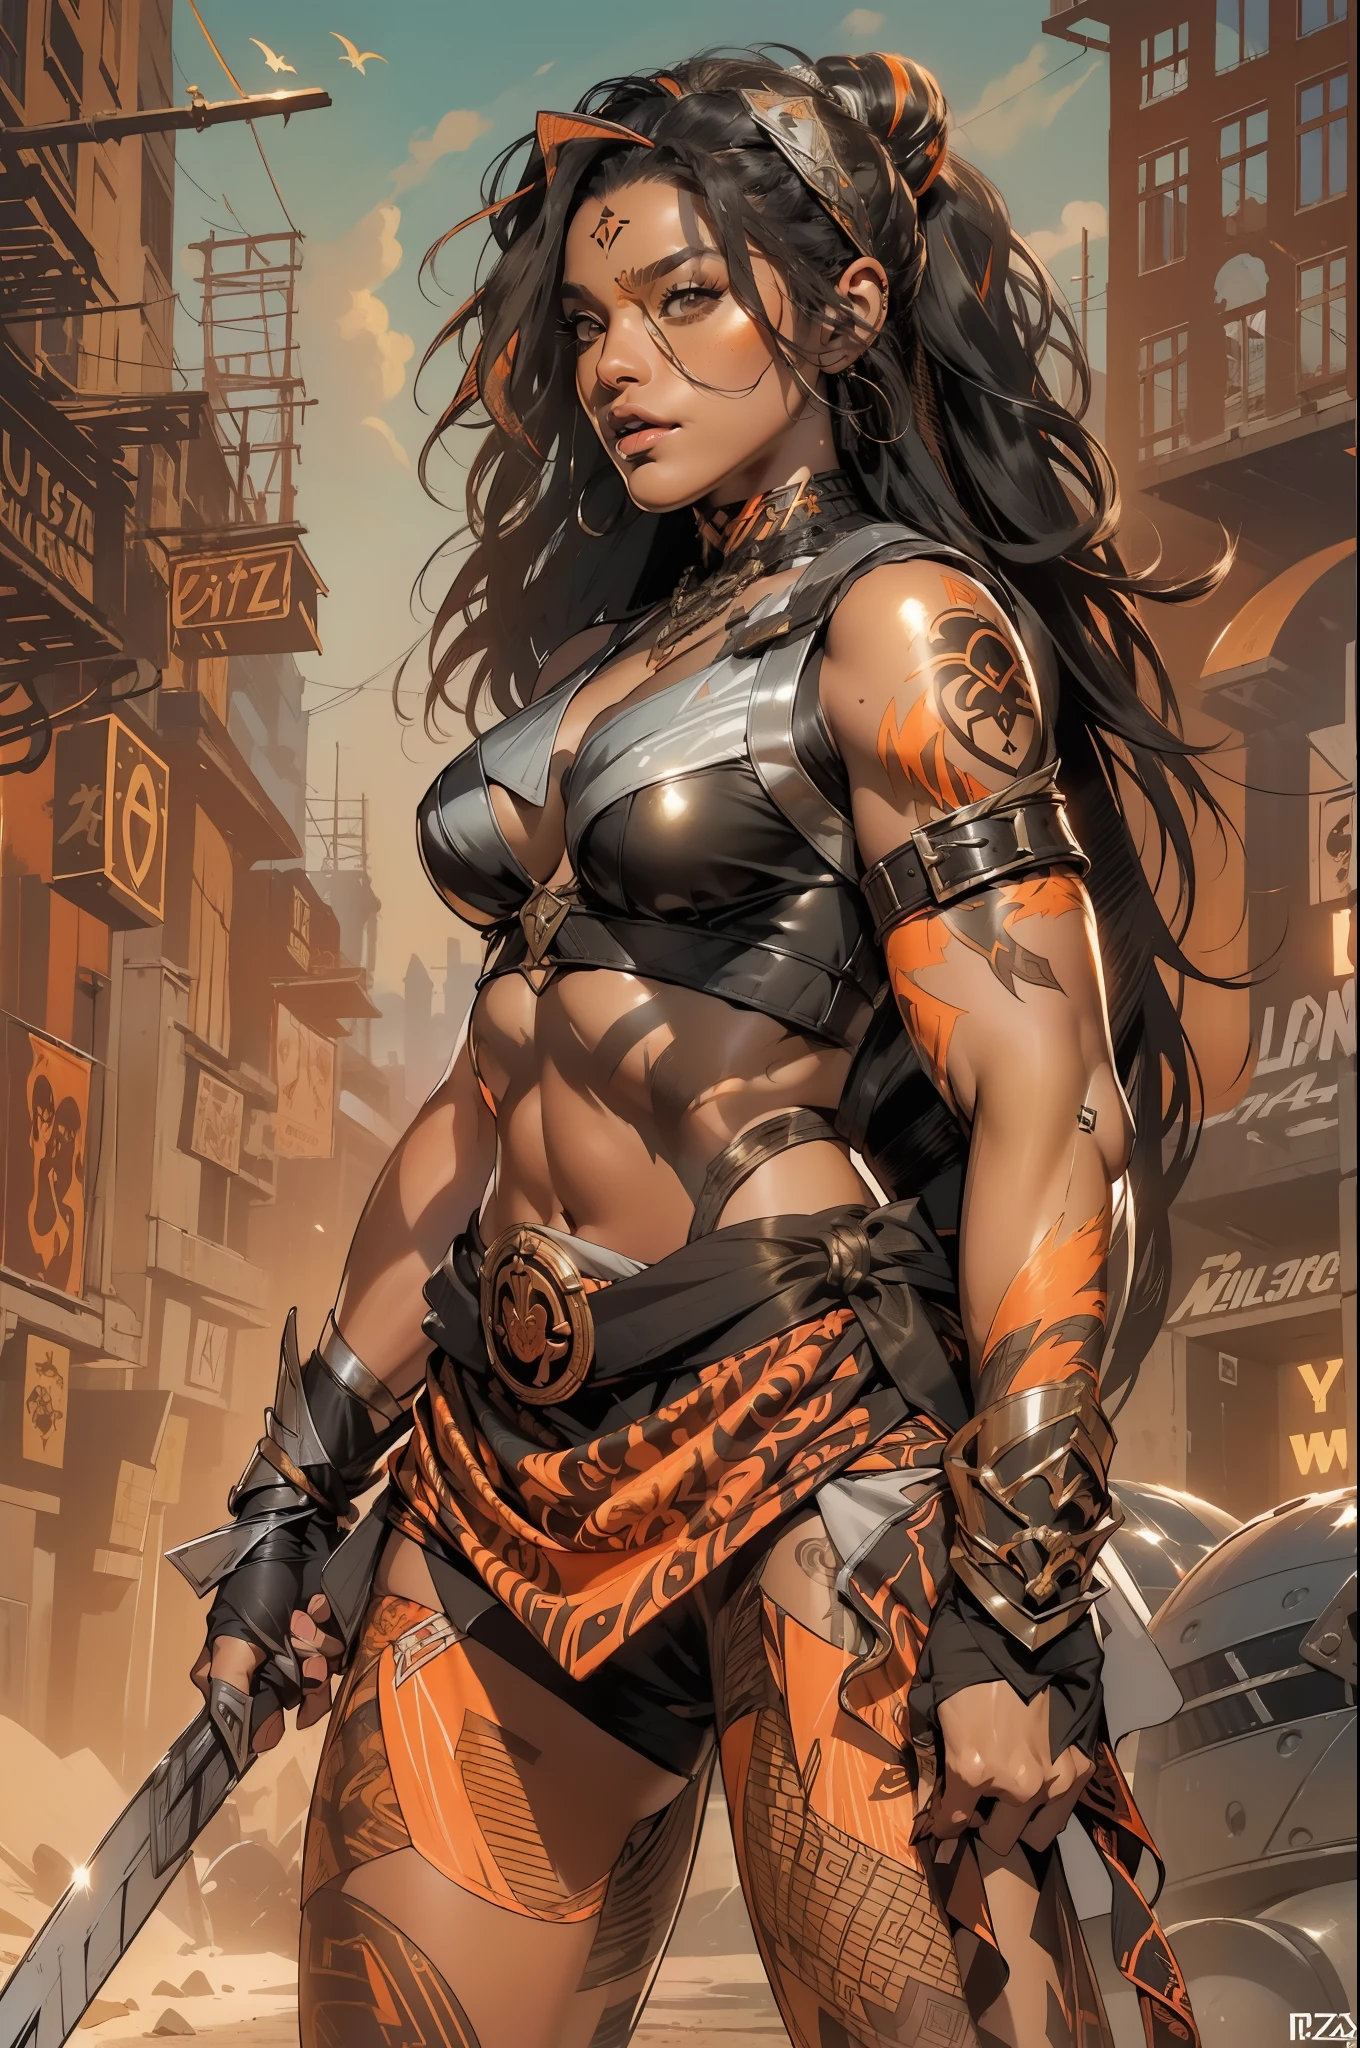 (((Woman))), (((best qualityer))), (((​masterpiece))), (((grown-up))), orange, A 30-year-old gladiator woman with an athletic body, (((standing alone))), (((1girl))) , Brooklyn Gladiators, almost naked in Simon Bisley&#39;s wild urban style for the cover of Heavy Metal magazine, black hair with ponytail, Minimum clothing, wavy pattern with orange and black katakanas, armour, full of spikes and rivets, (((from the knee up))), bob haircut black hair